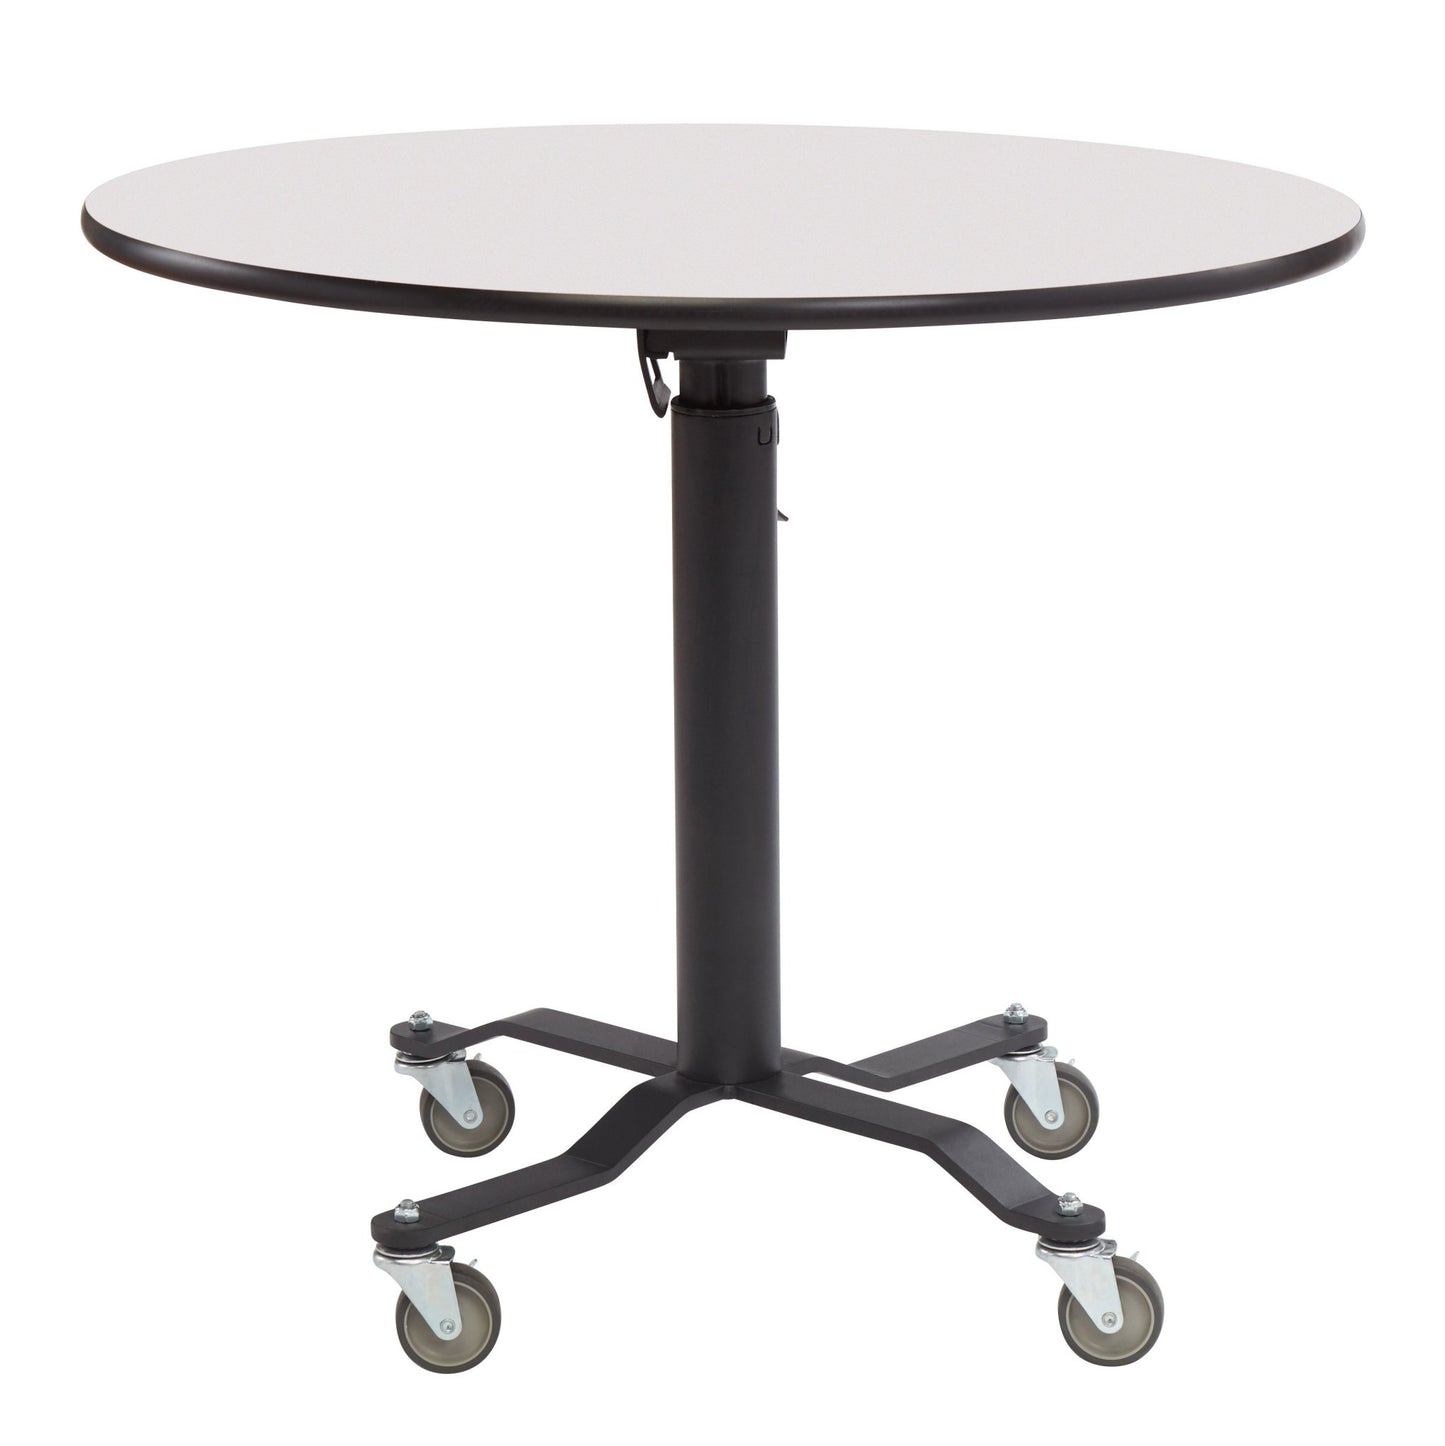 NPS Cafe Time II Table, 30" Round, Whiteboard Top, Particle Board, Vinyl T-Molding (NationalPublic Seating NPS-PCT130PBTMWB) - SchoolOutlet